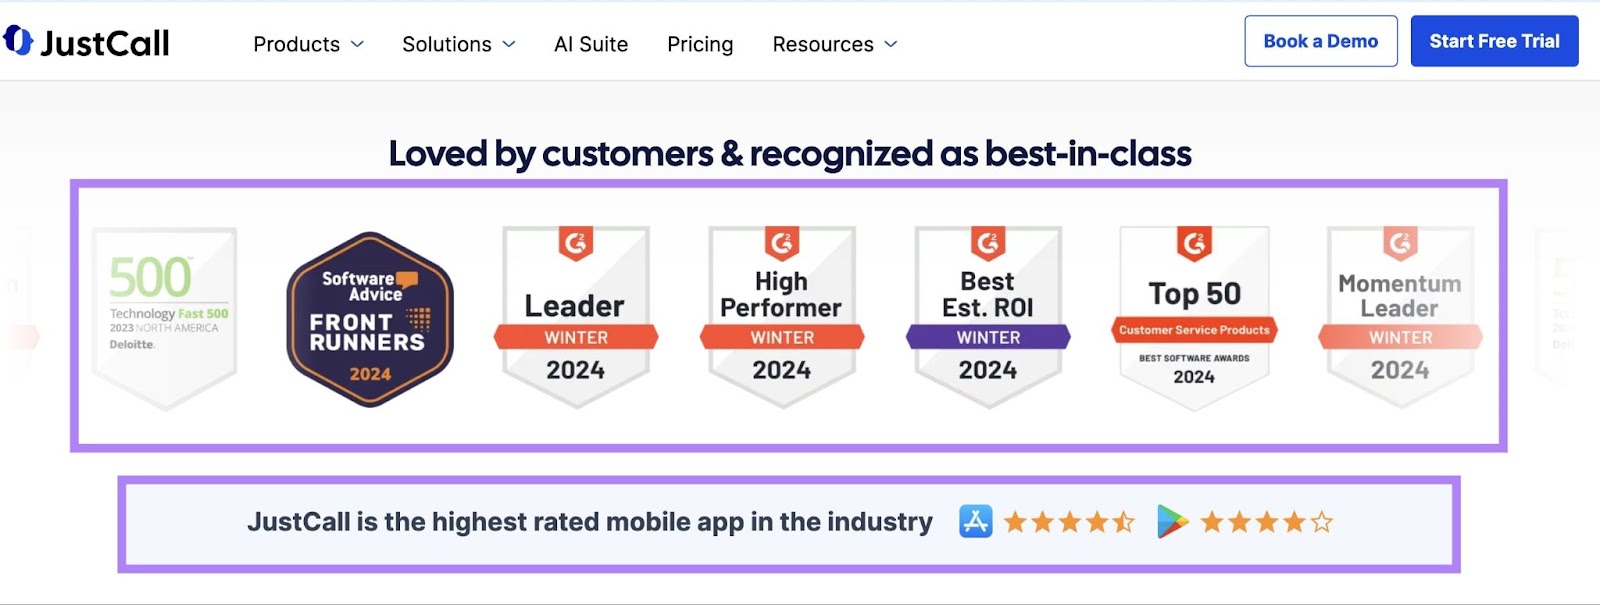 G2 badges and app ratings on JustCall's homepage